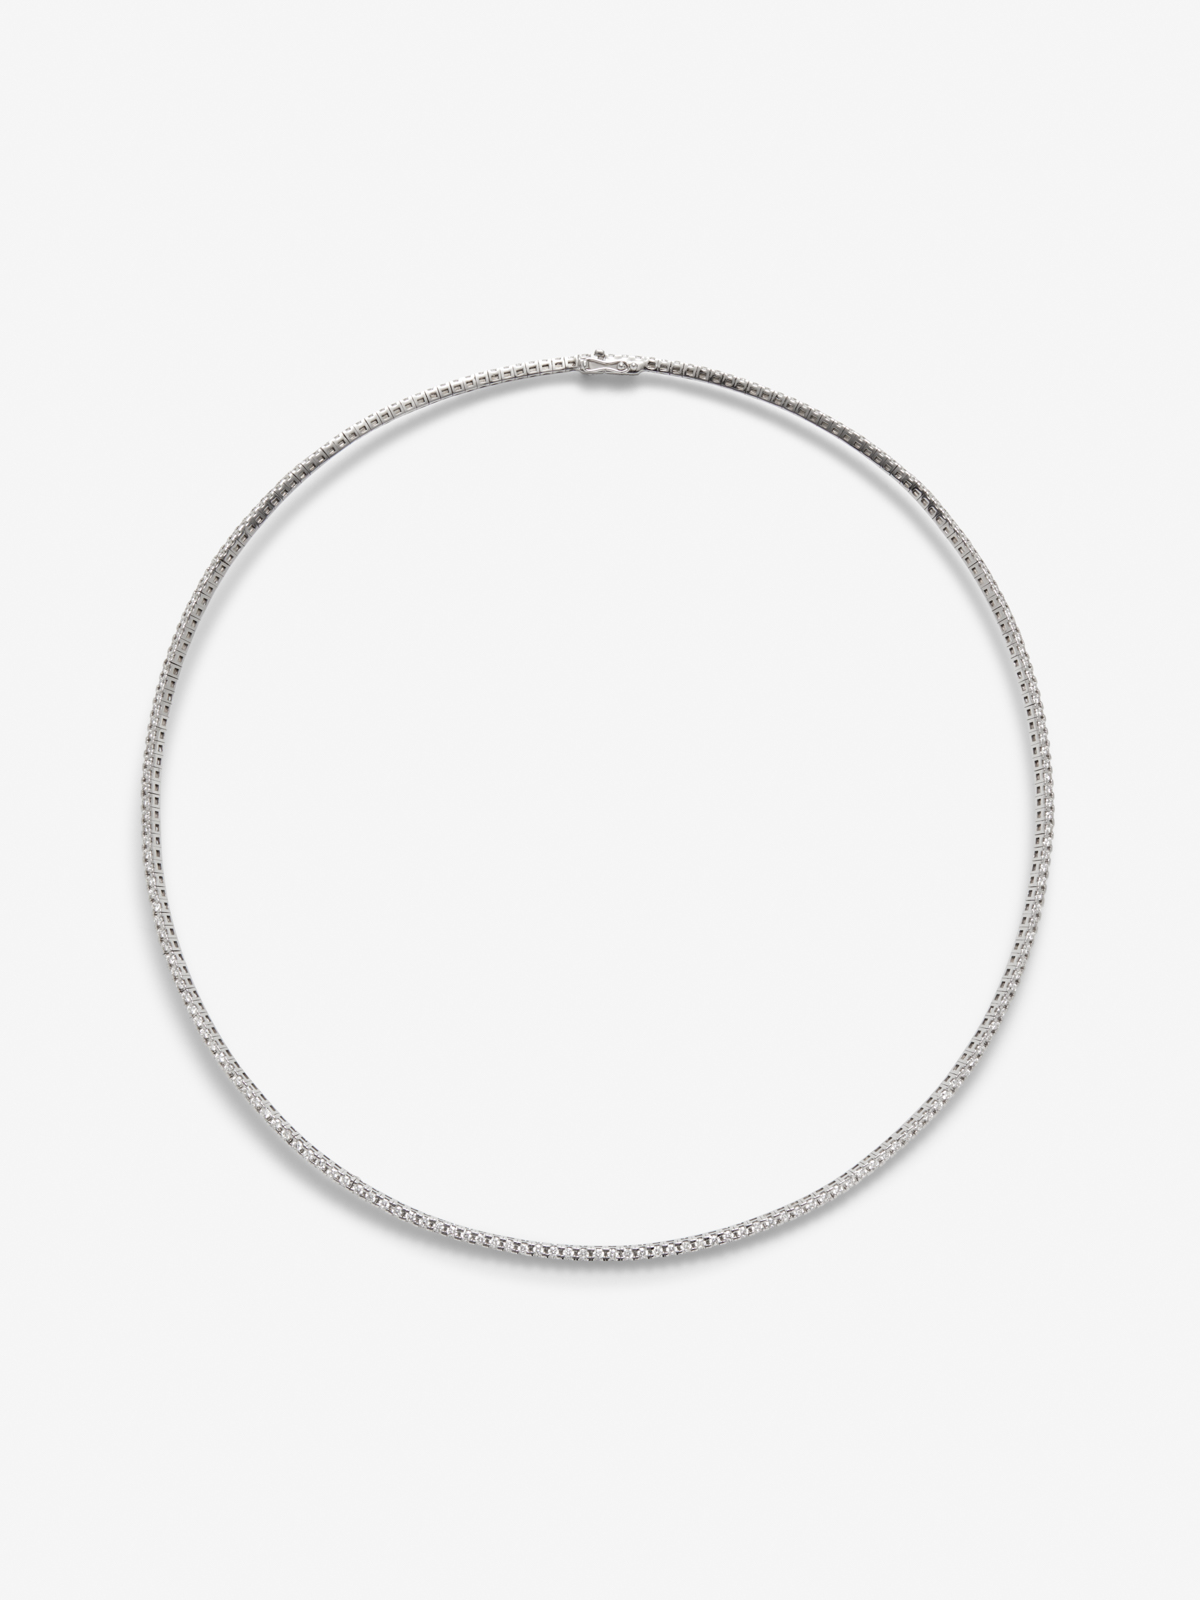 18K white gold rivière necklace with 207 brilliant-cut diamonds with a total of 3.06 cts